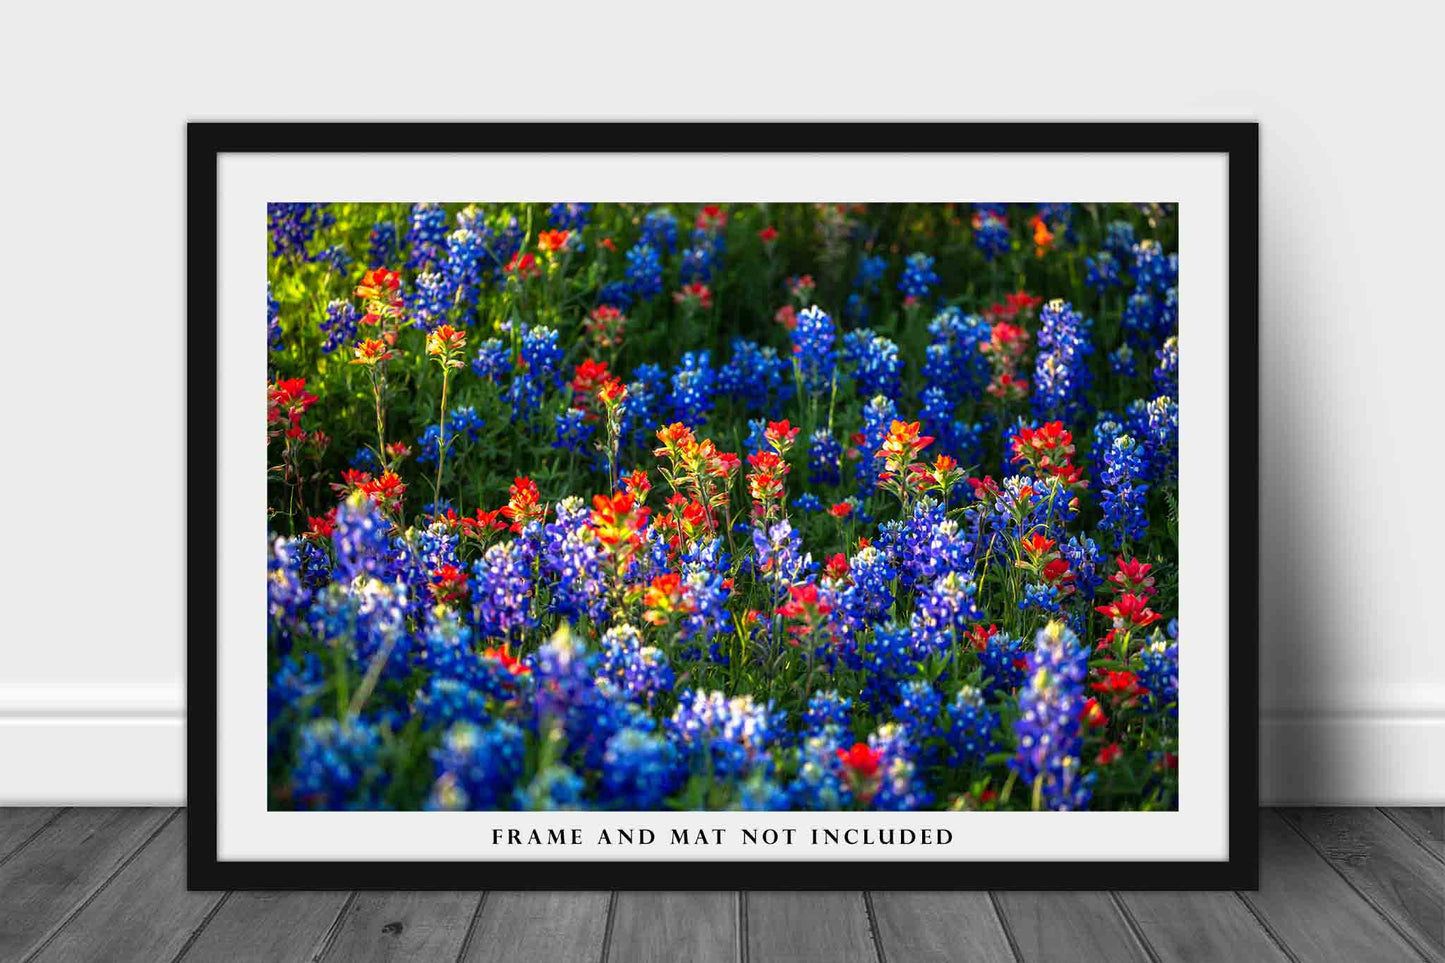 Wildflower Photography Print | Bluebonnets and Indian Paintbrush Picture | Texas Wall Art | Flower Photo | Floral Decor | Not Framed